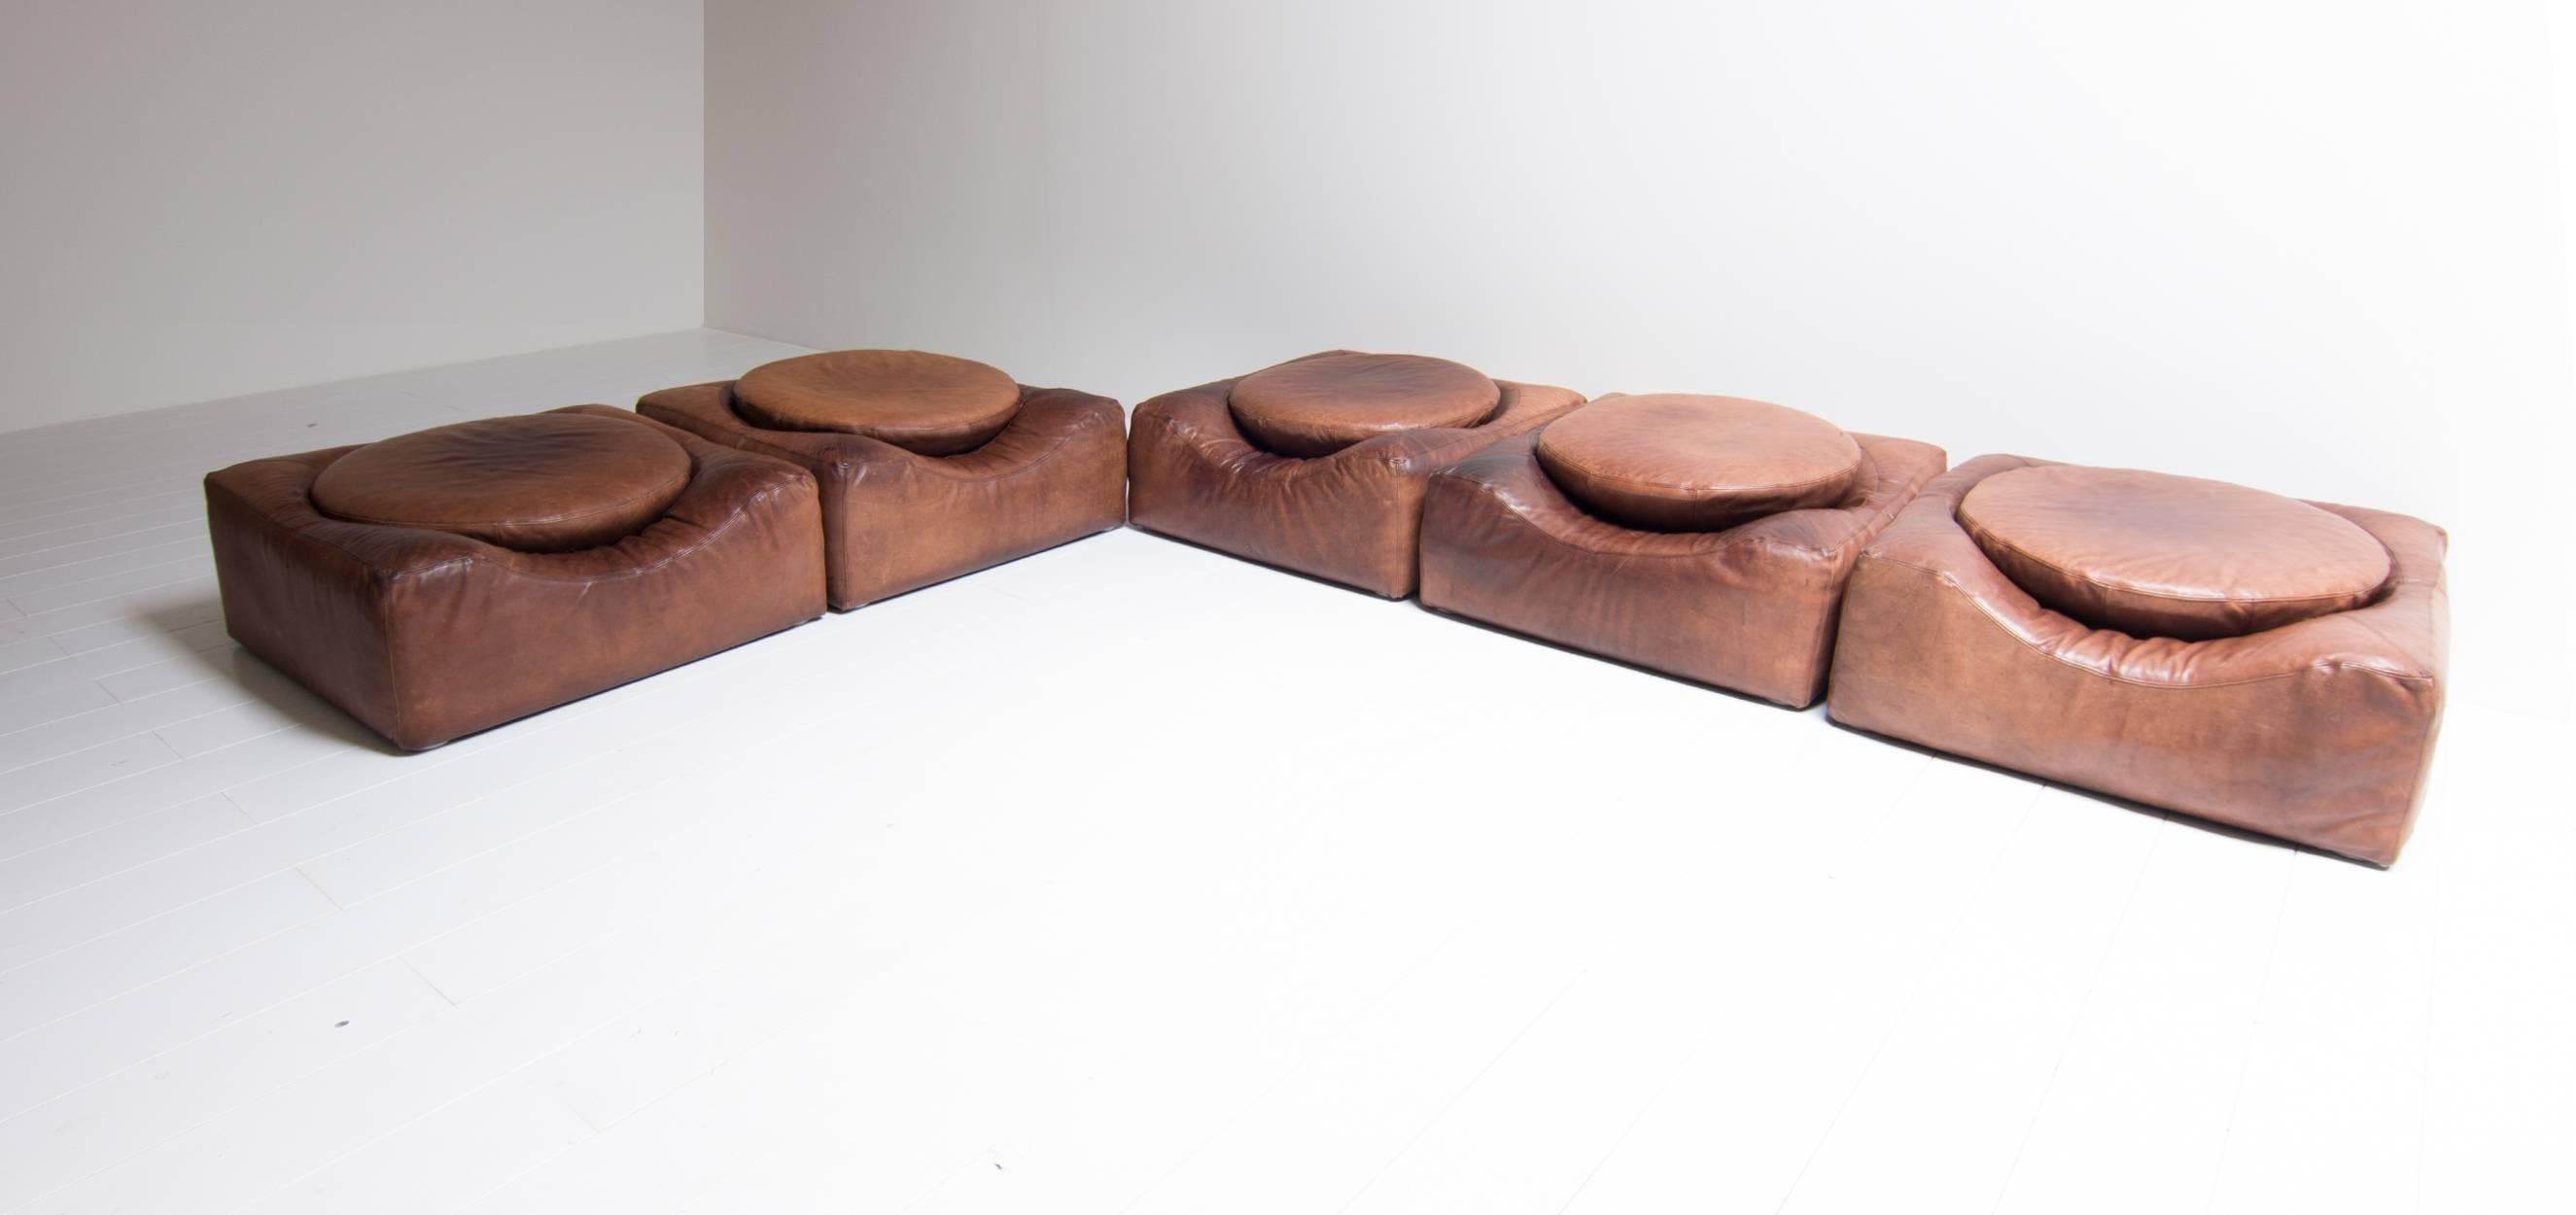 Very rare 1970s sectional sofa in original calfskin upholstery. You can use the round cushions as a back cushion when you wanted to sit down in the sofa. You also can turn the cushions when you choose to lay on the sofa or just to take another